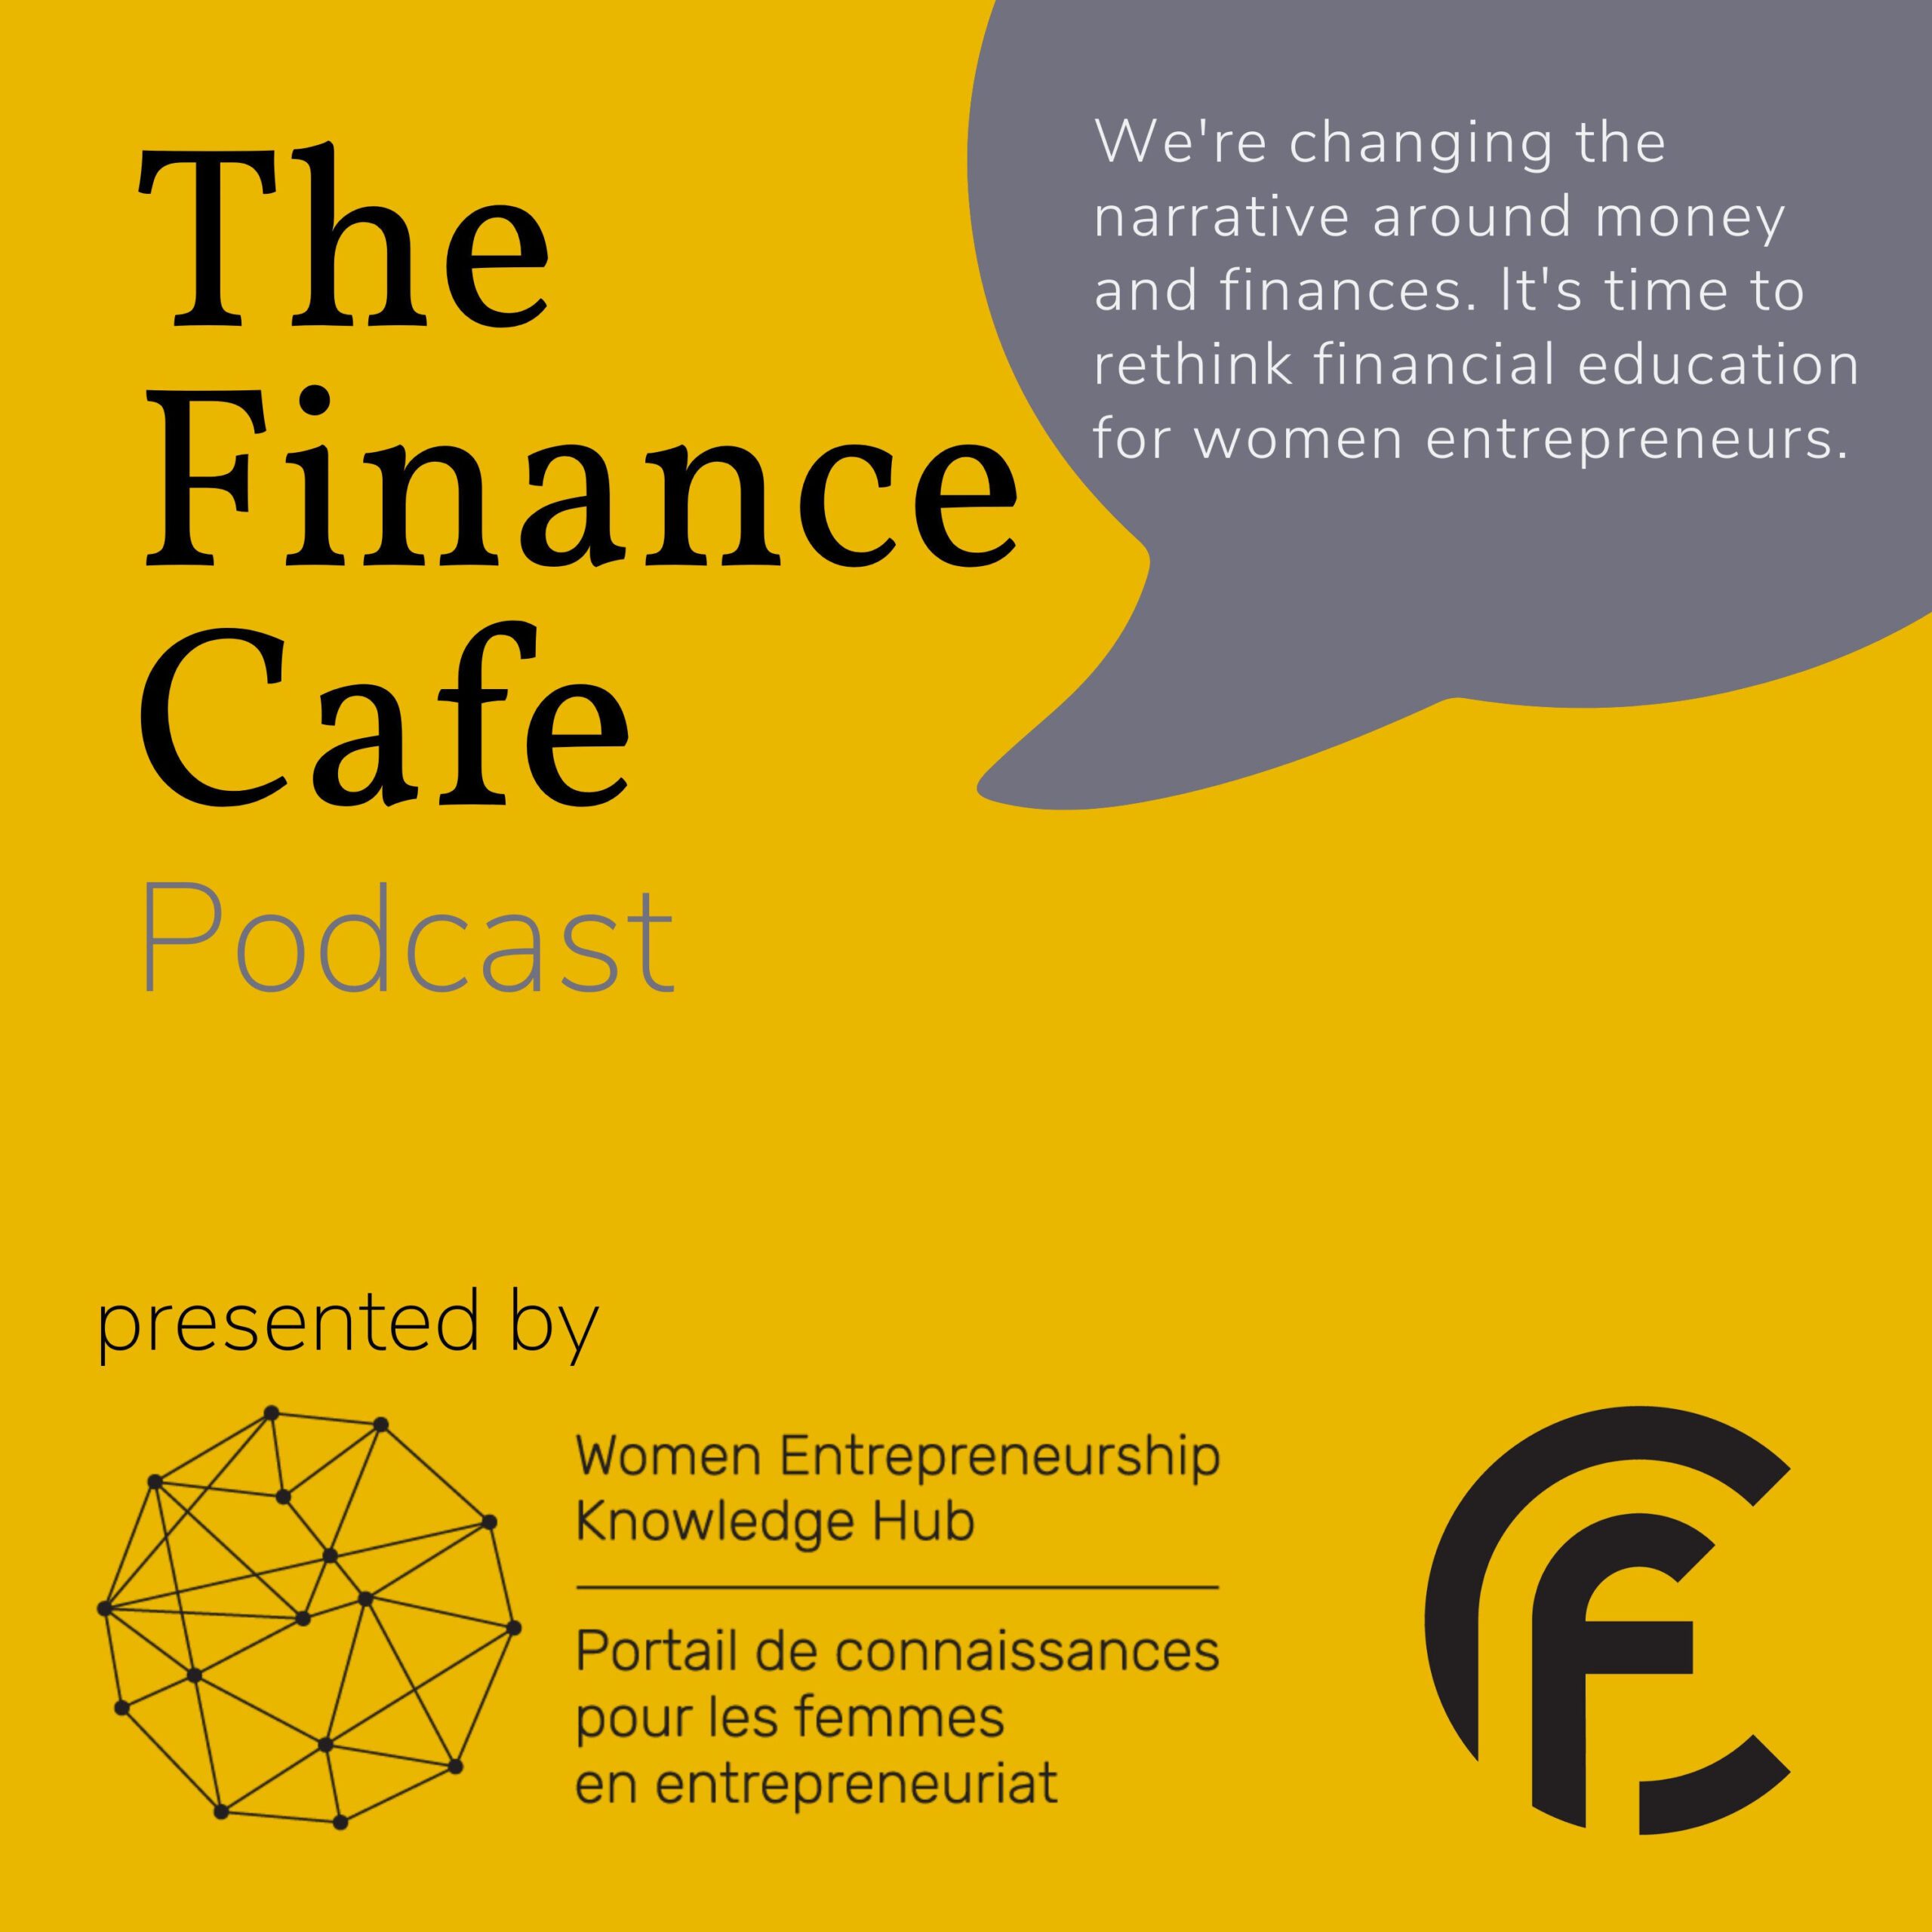 The Finance Cafe